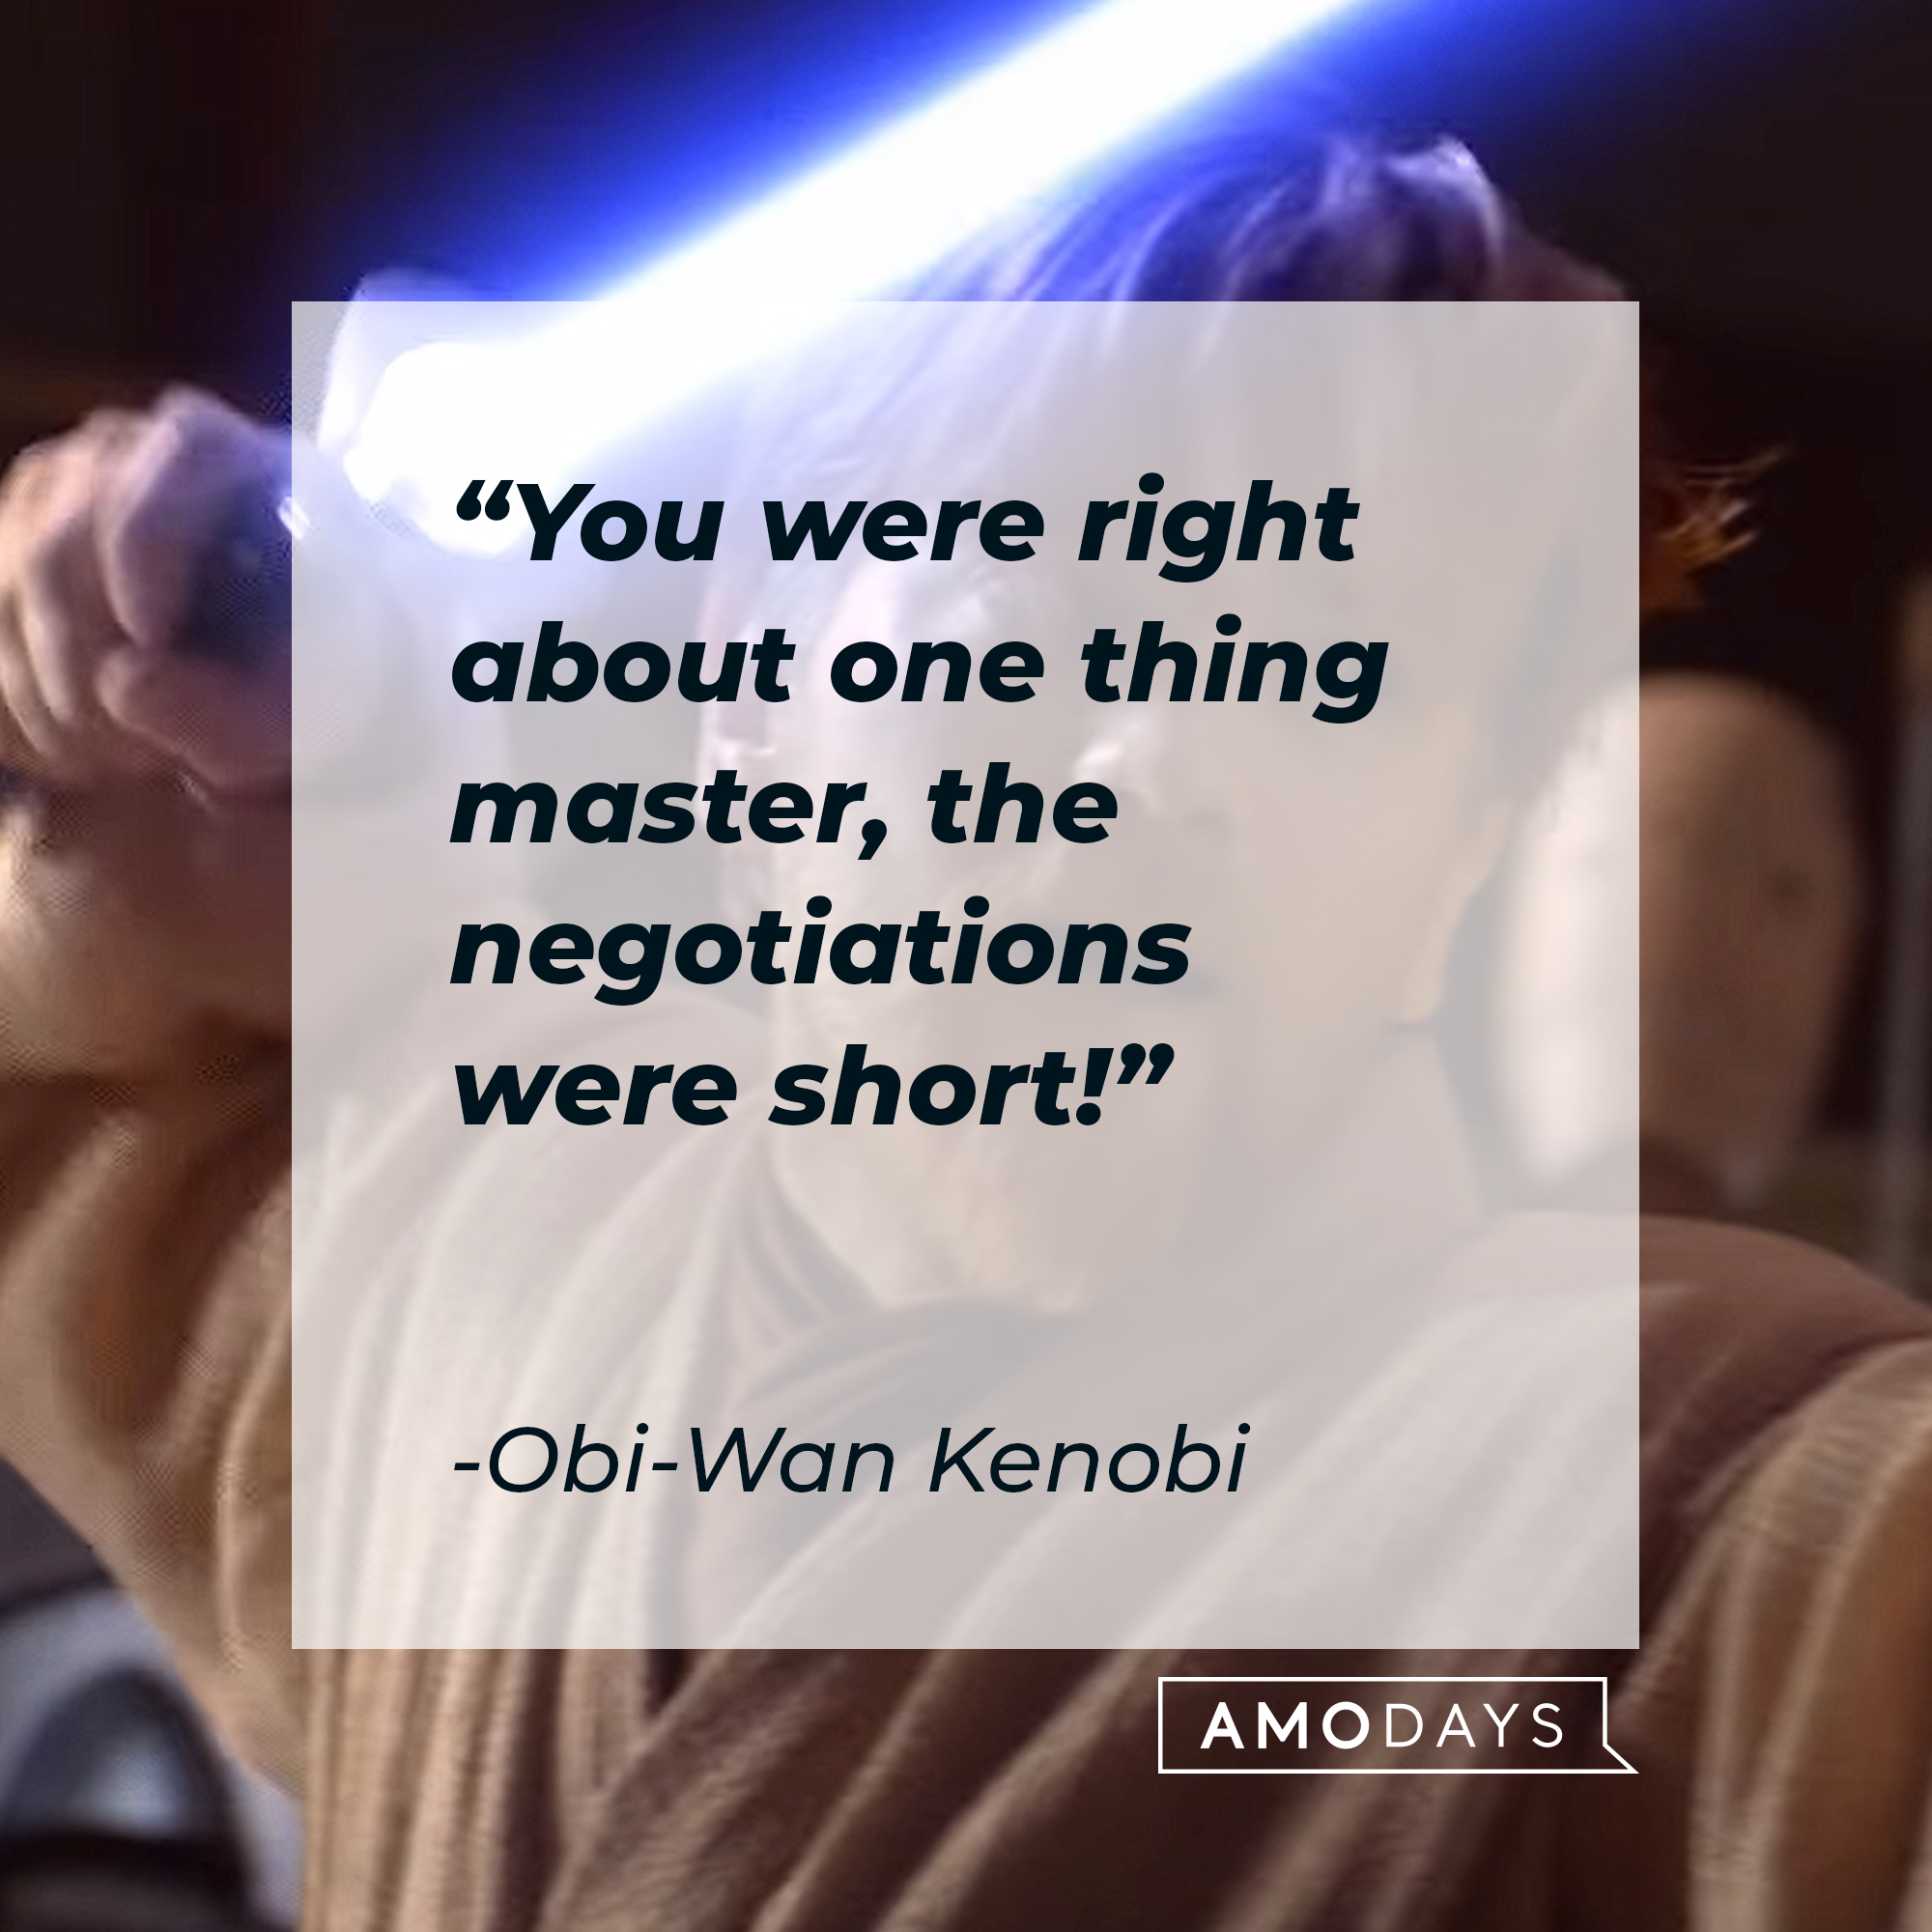 Obi-Wan Kenobi with his quote: "You were right about one thing master, the negotiations were short!" | Source: Youtube/StarWars